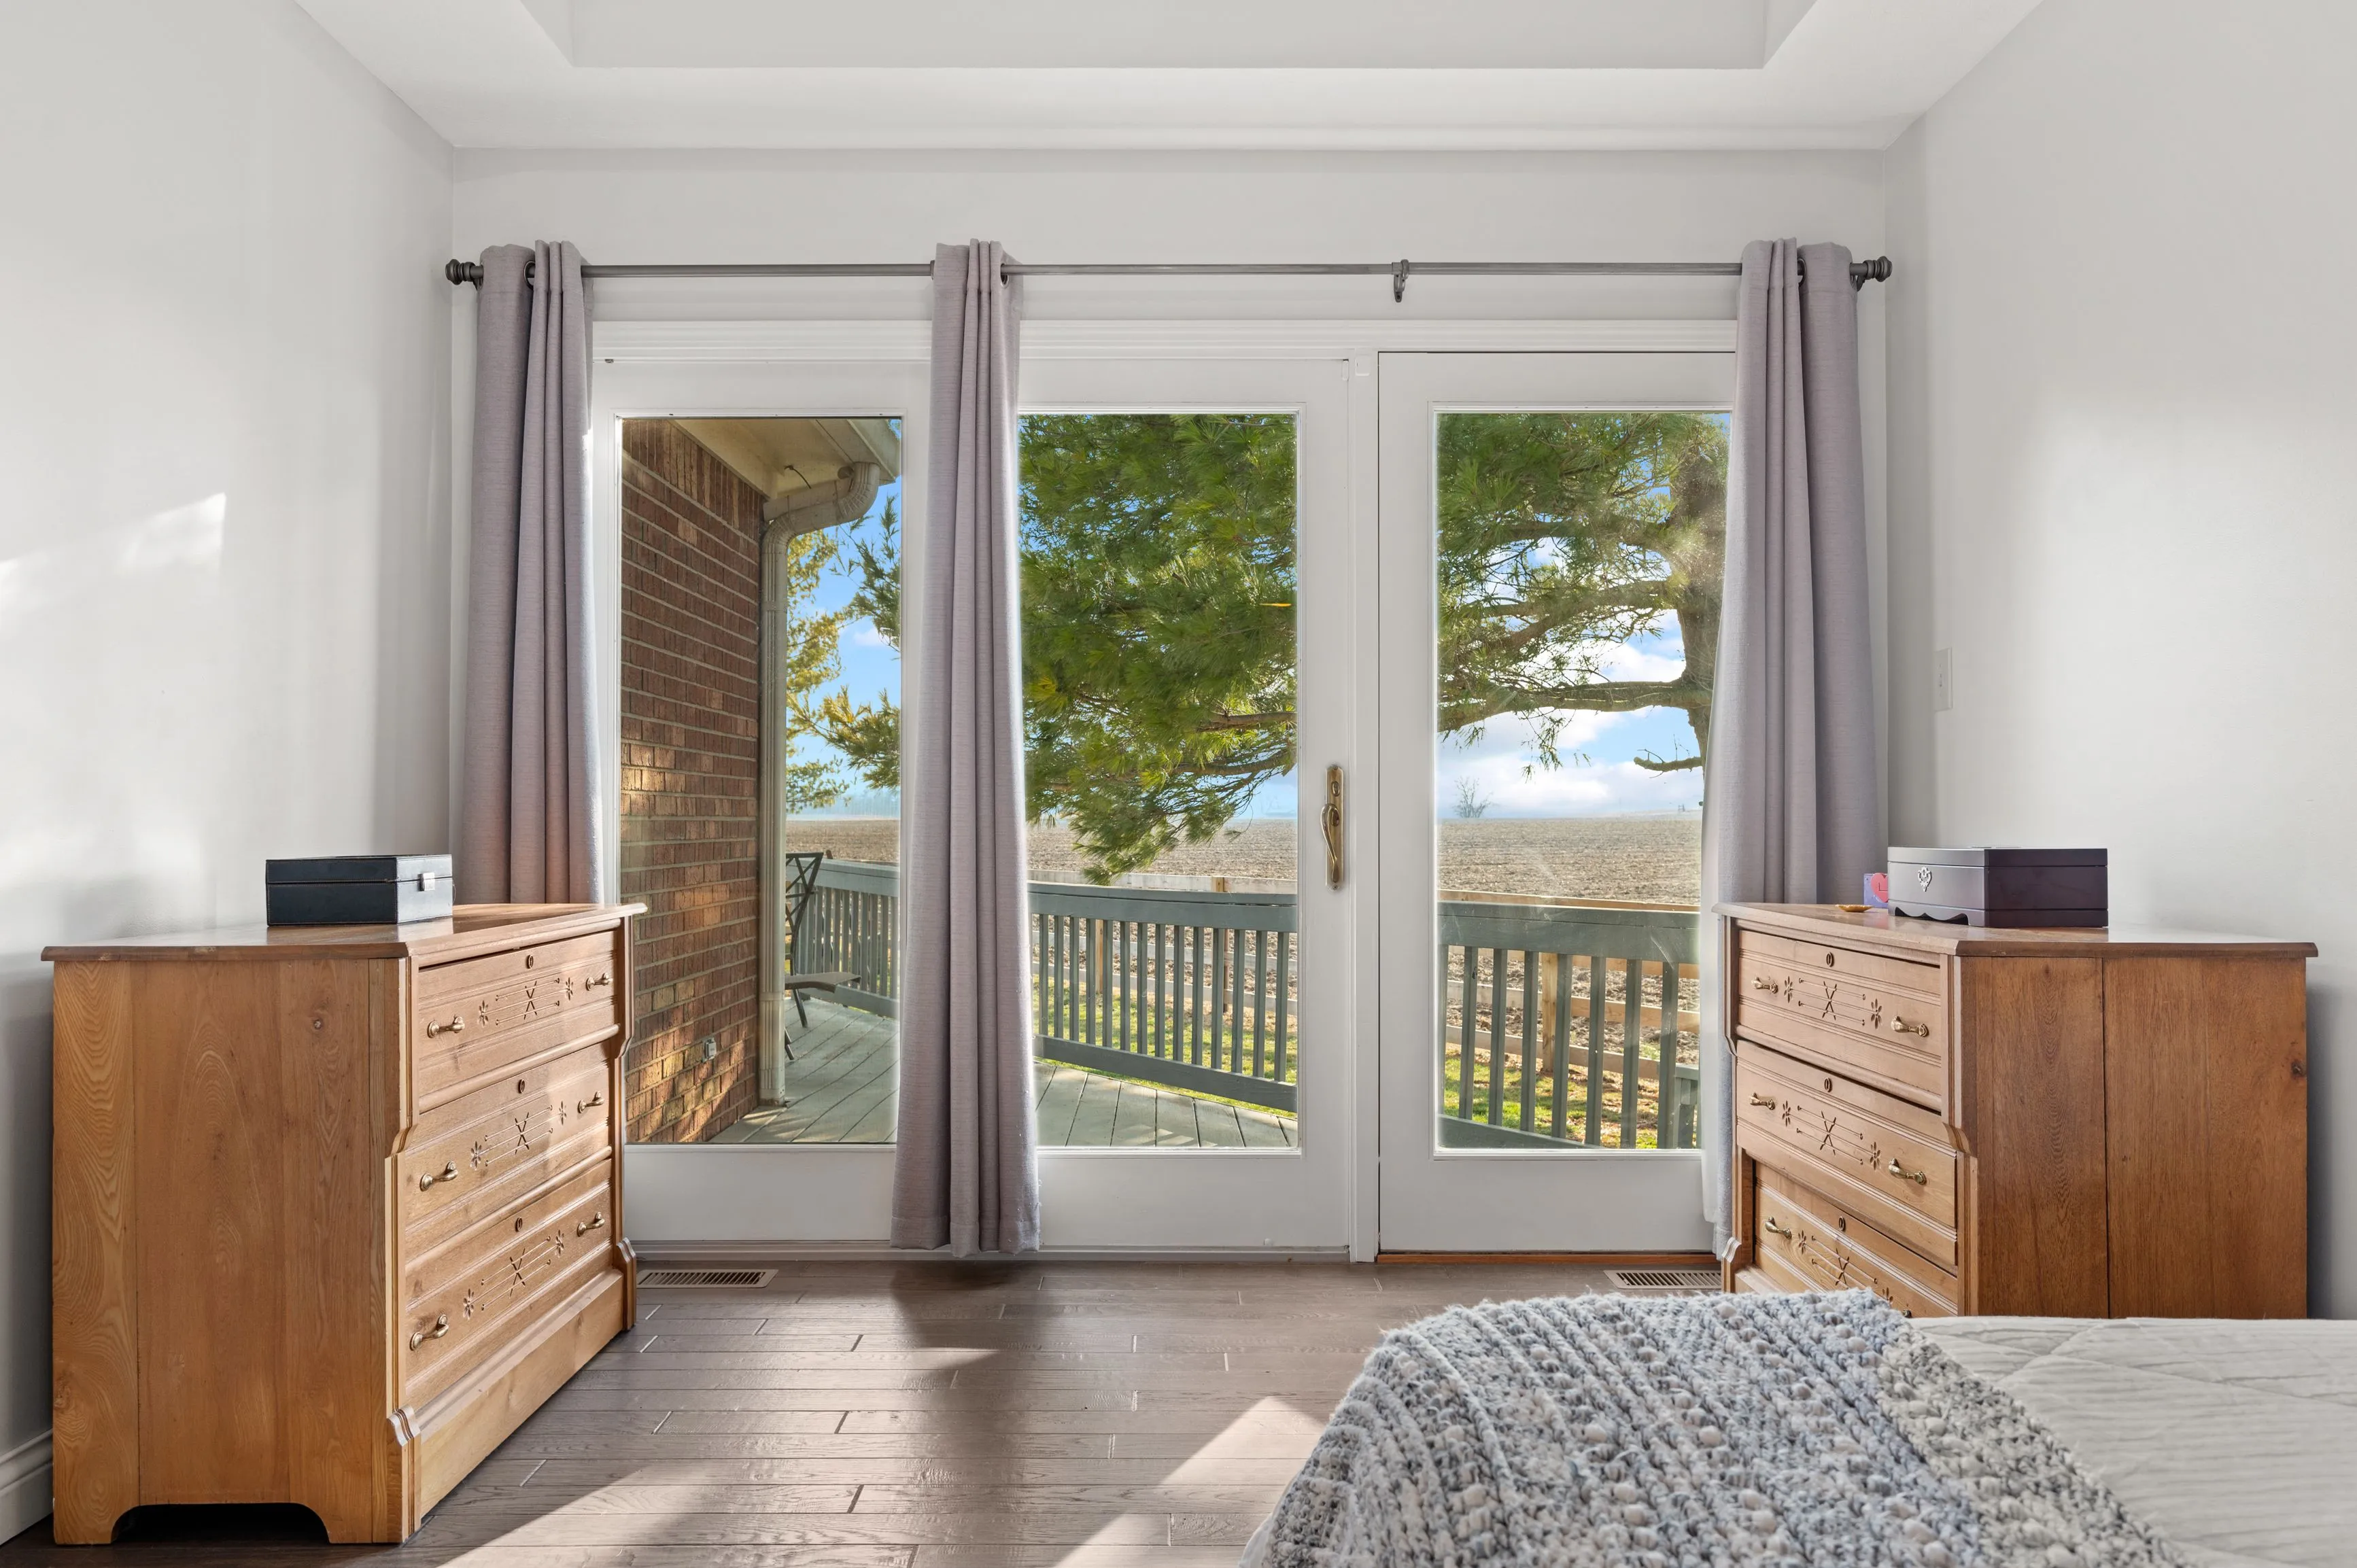 Bright bedroom with open French doors leading to a balcony with a view of trees and the horizon, flanked by gray curtains and furnished with a wooden dresser and a glimpse of a covered bed in the foreground.